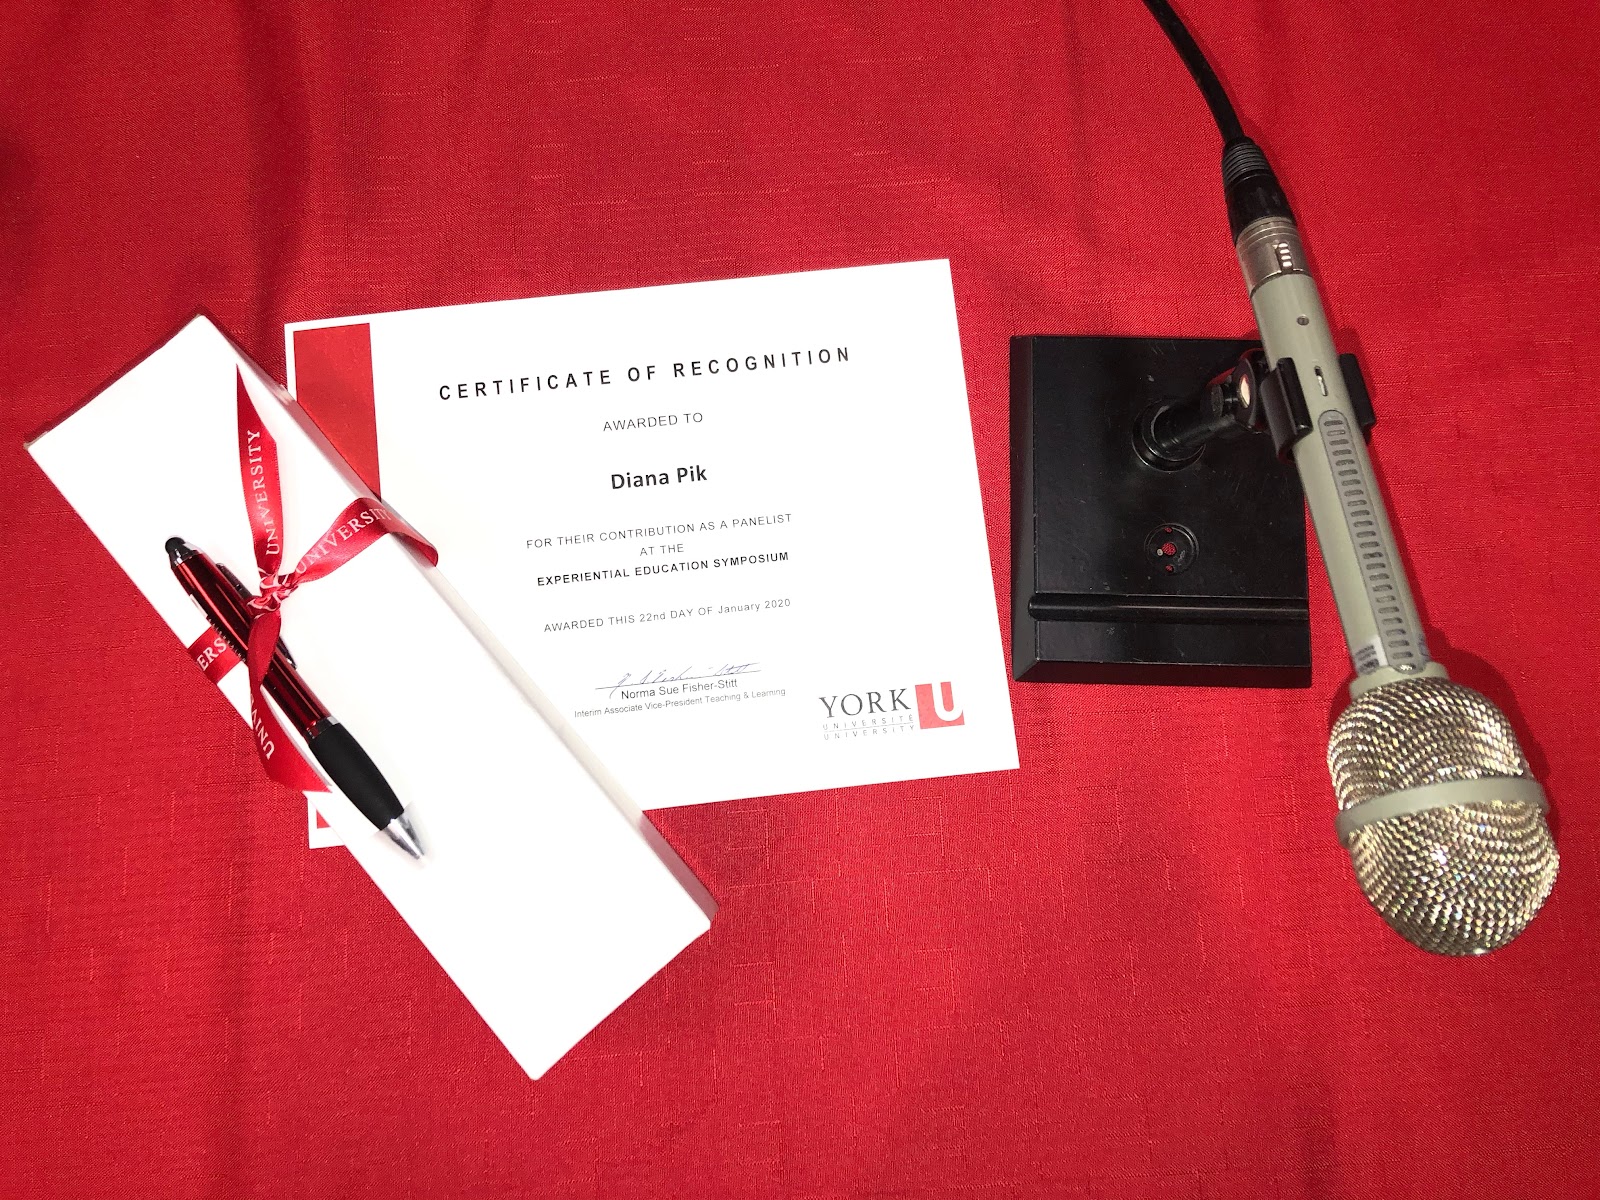 Four objects on a table. left to right the objects are a box with a pen attached to it, a certificate of recognition, and a microphone. 
